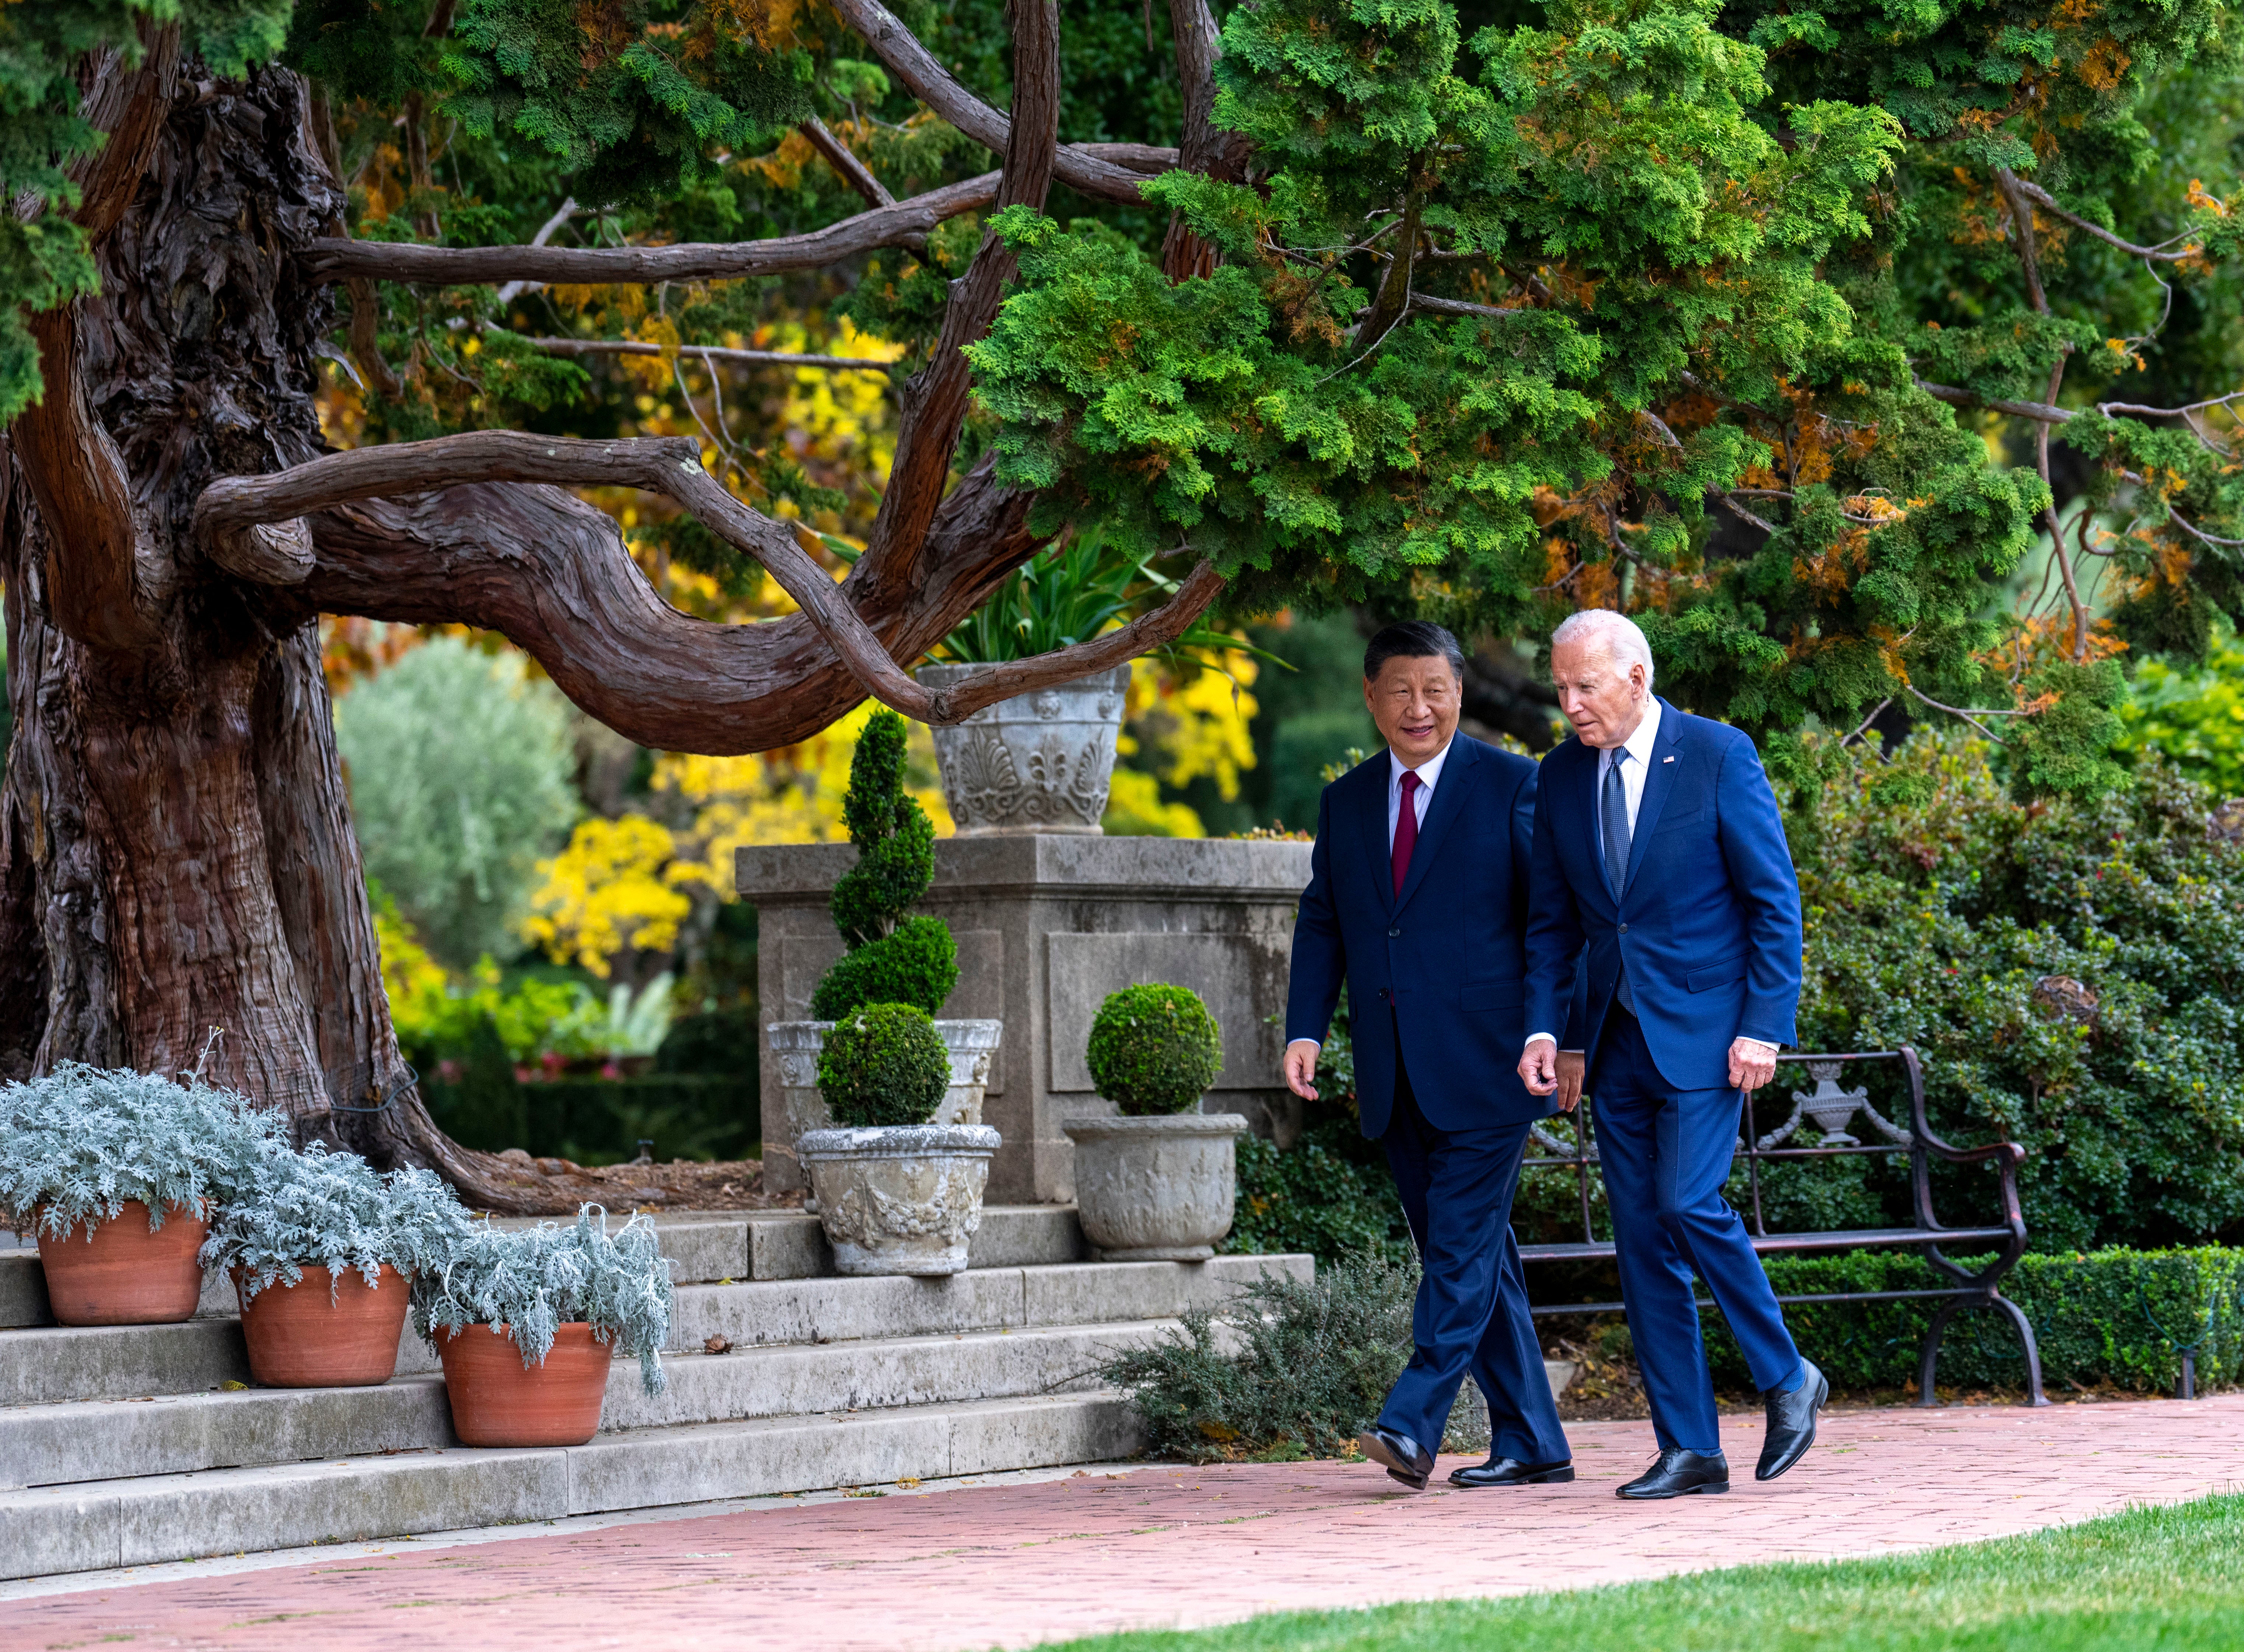 Does Biden’s meeting with Xi Jinping signal a shift in global power?